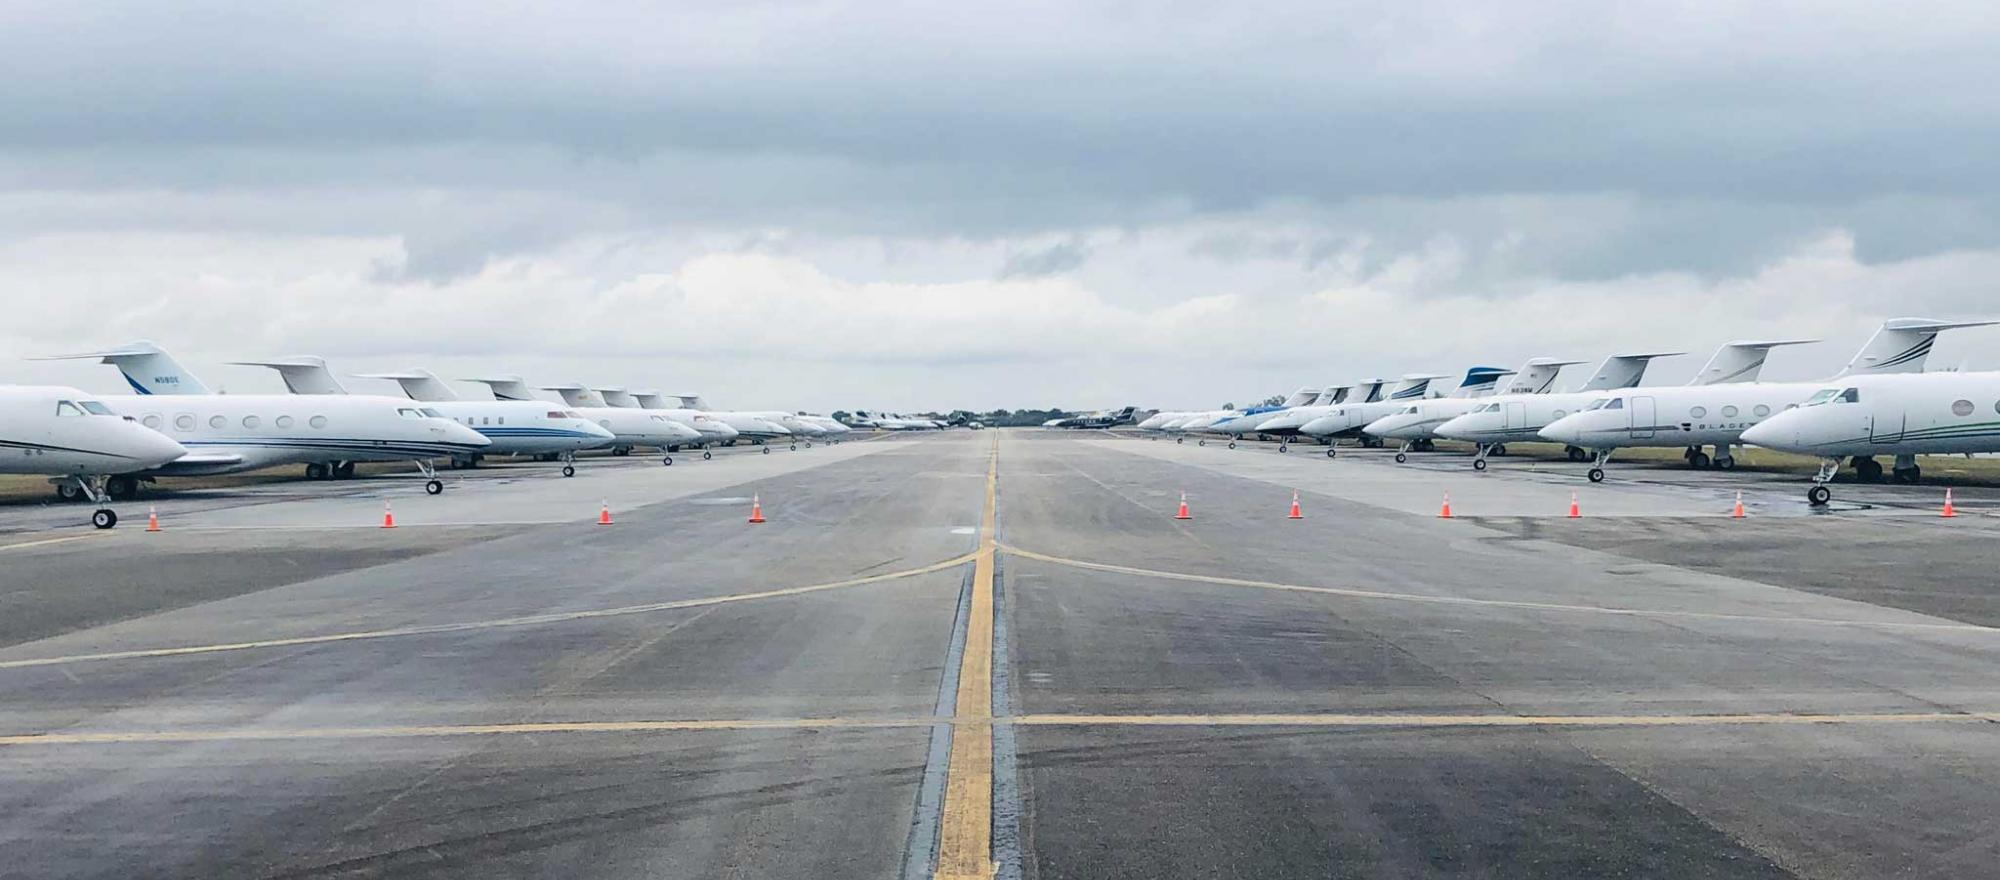 Private jets line a runway used for overflow parking at Miami Opa-locka Executive Airport